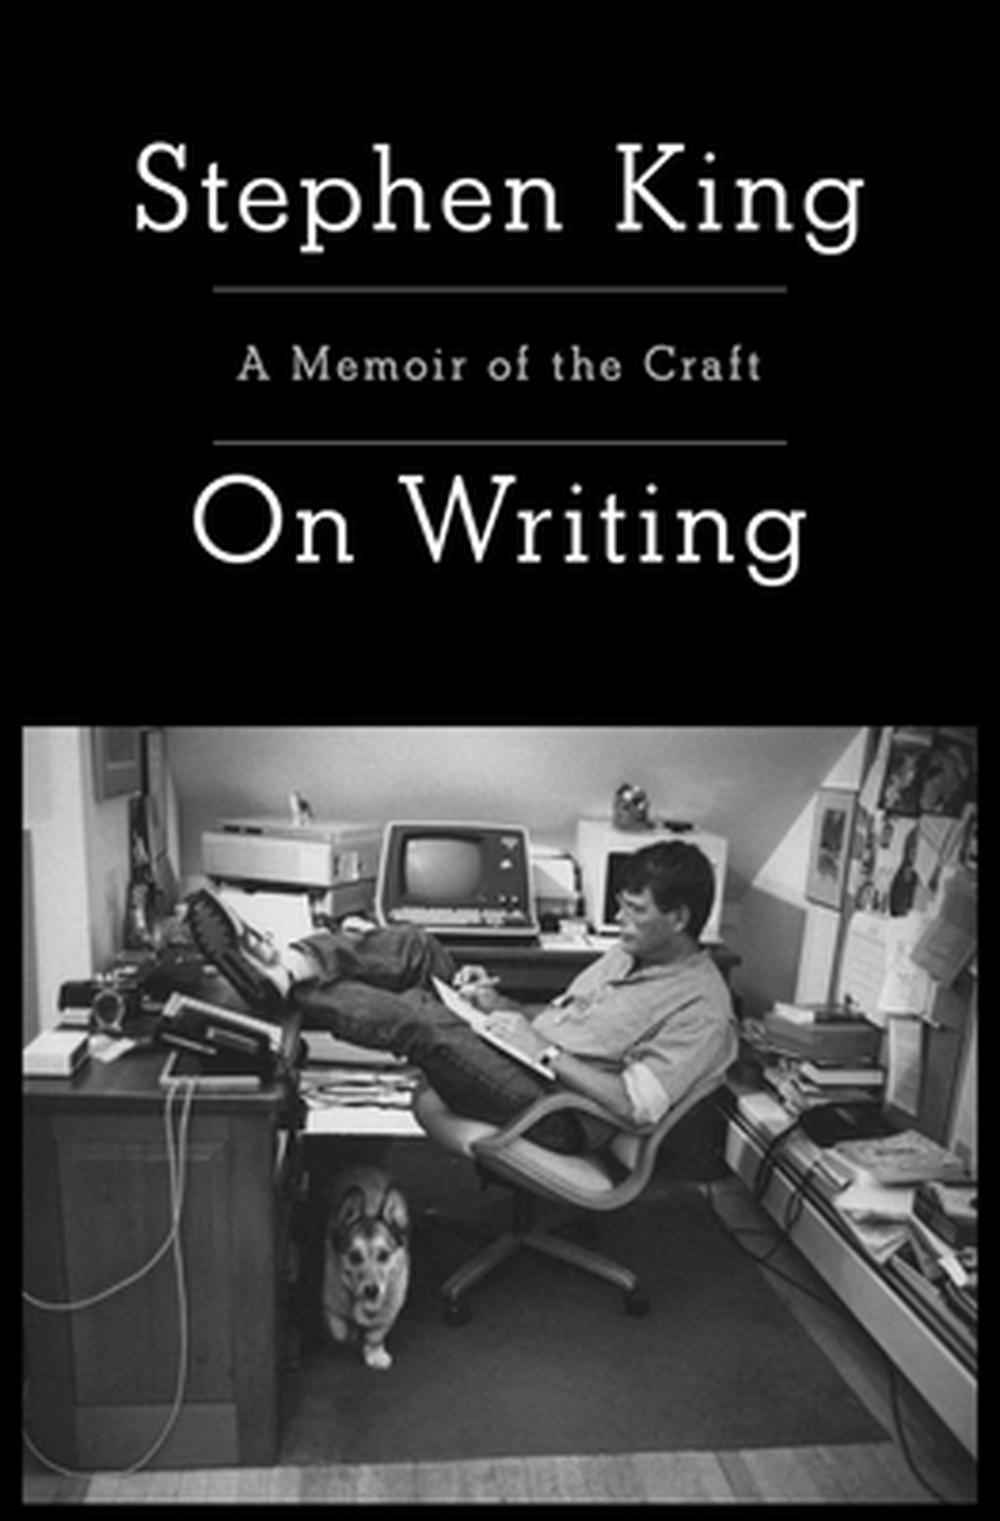 On Writing: A Memoir of the Craft by Stephen King ...